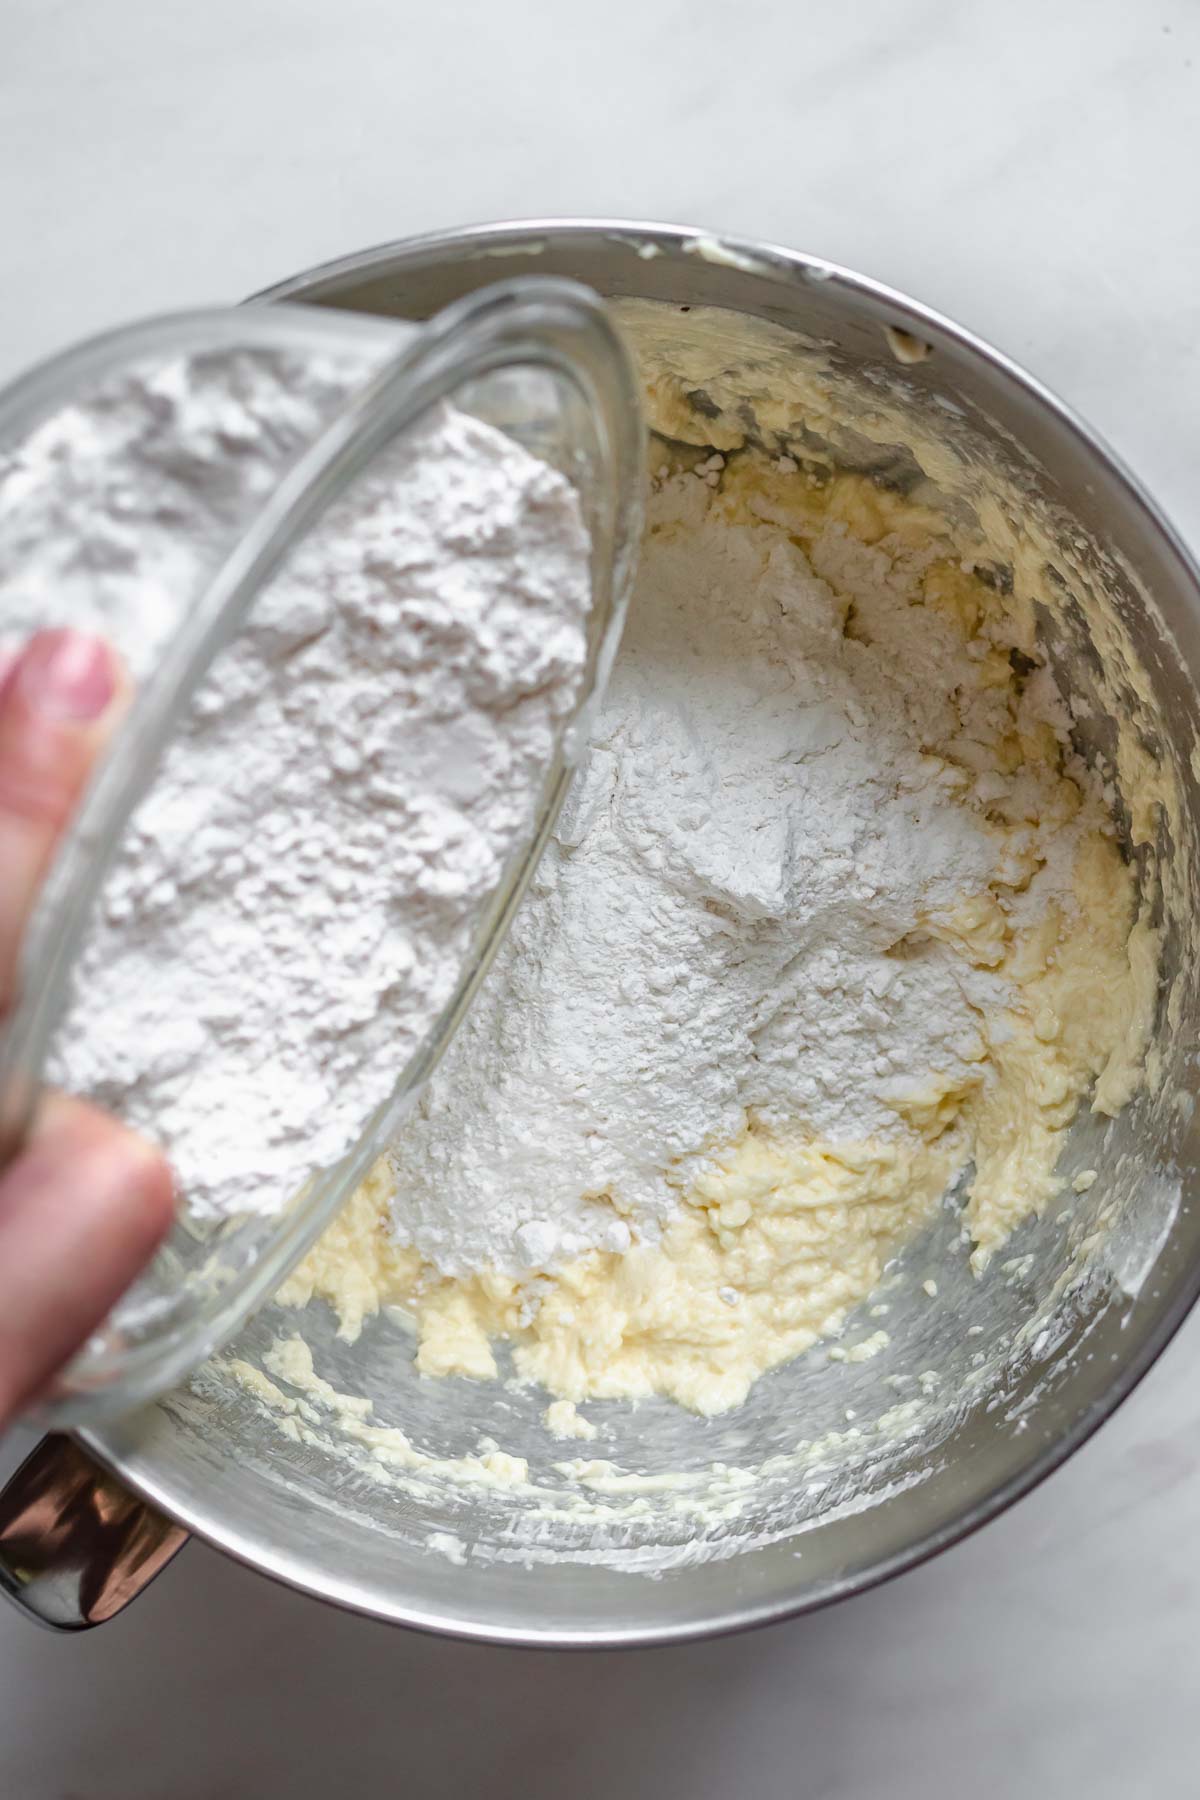 Flour pouring into muffin batter.